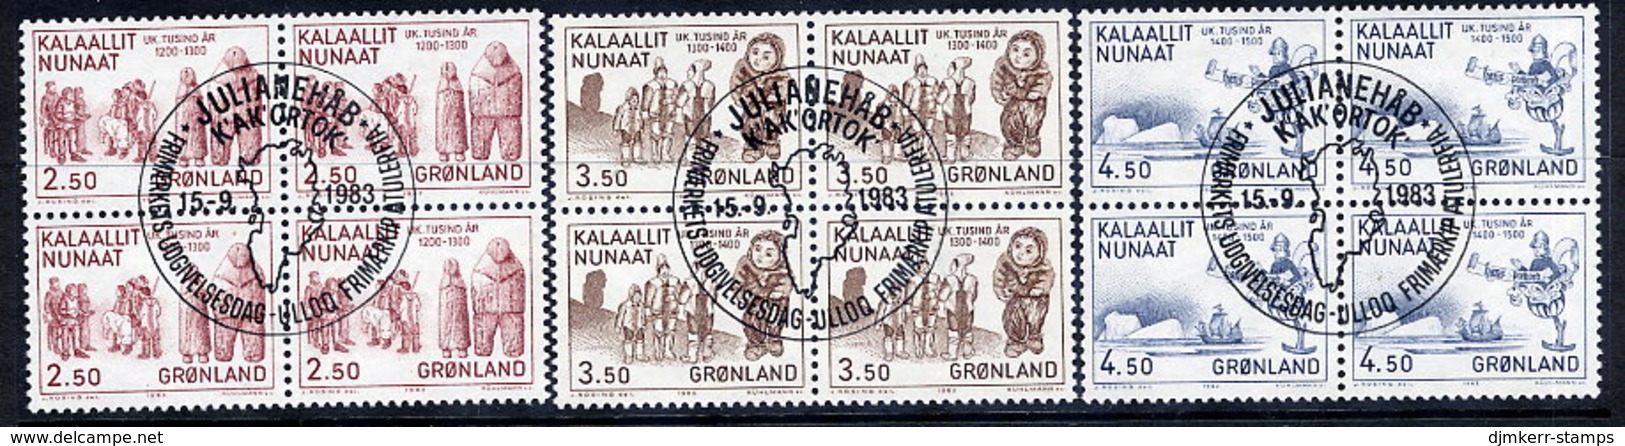 GREENLAND 1983 Millenary Of Settlement In Used  Blocks Of 4.  Michel 143-45 - Usati